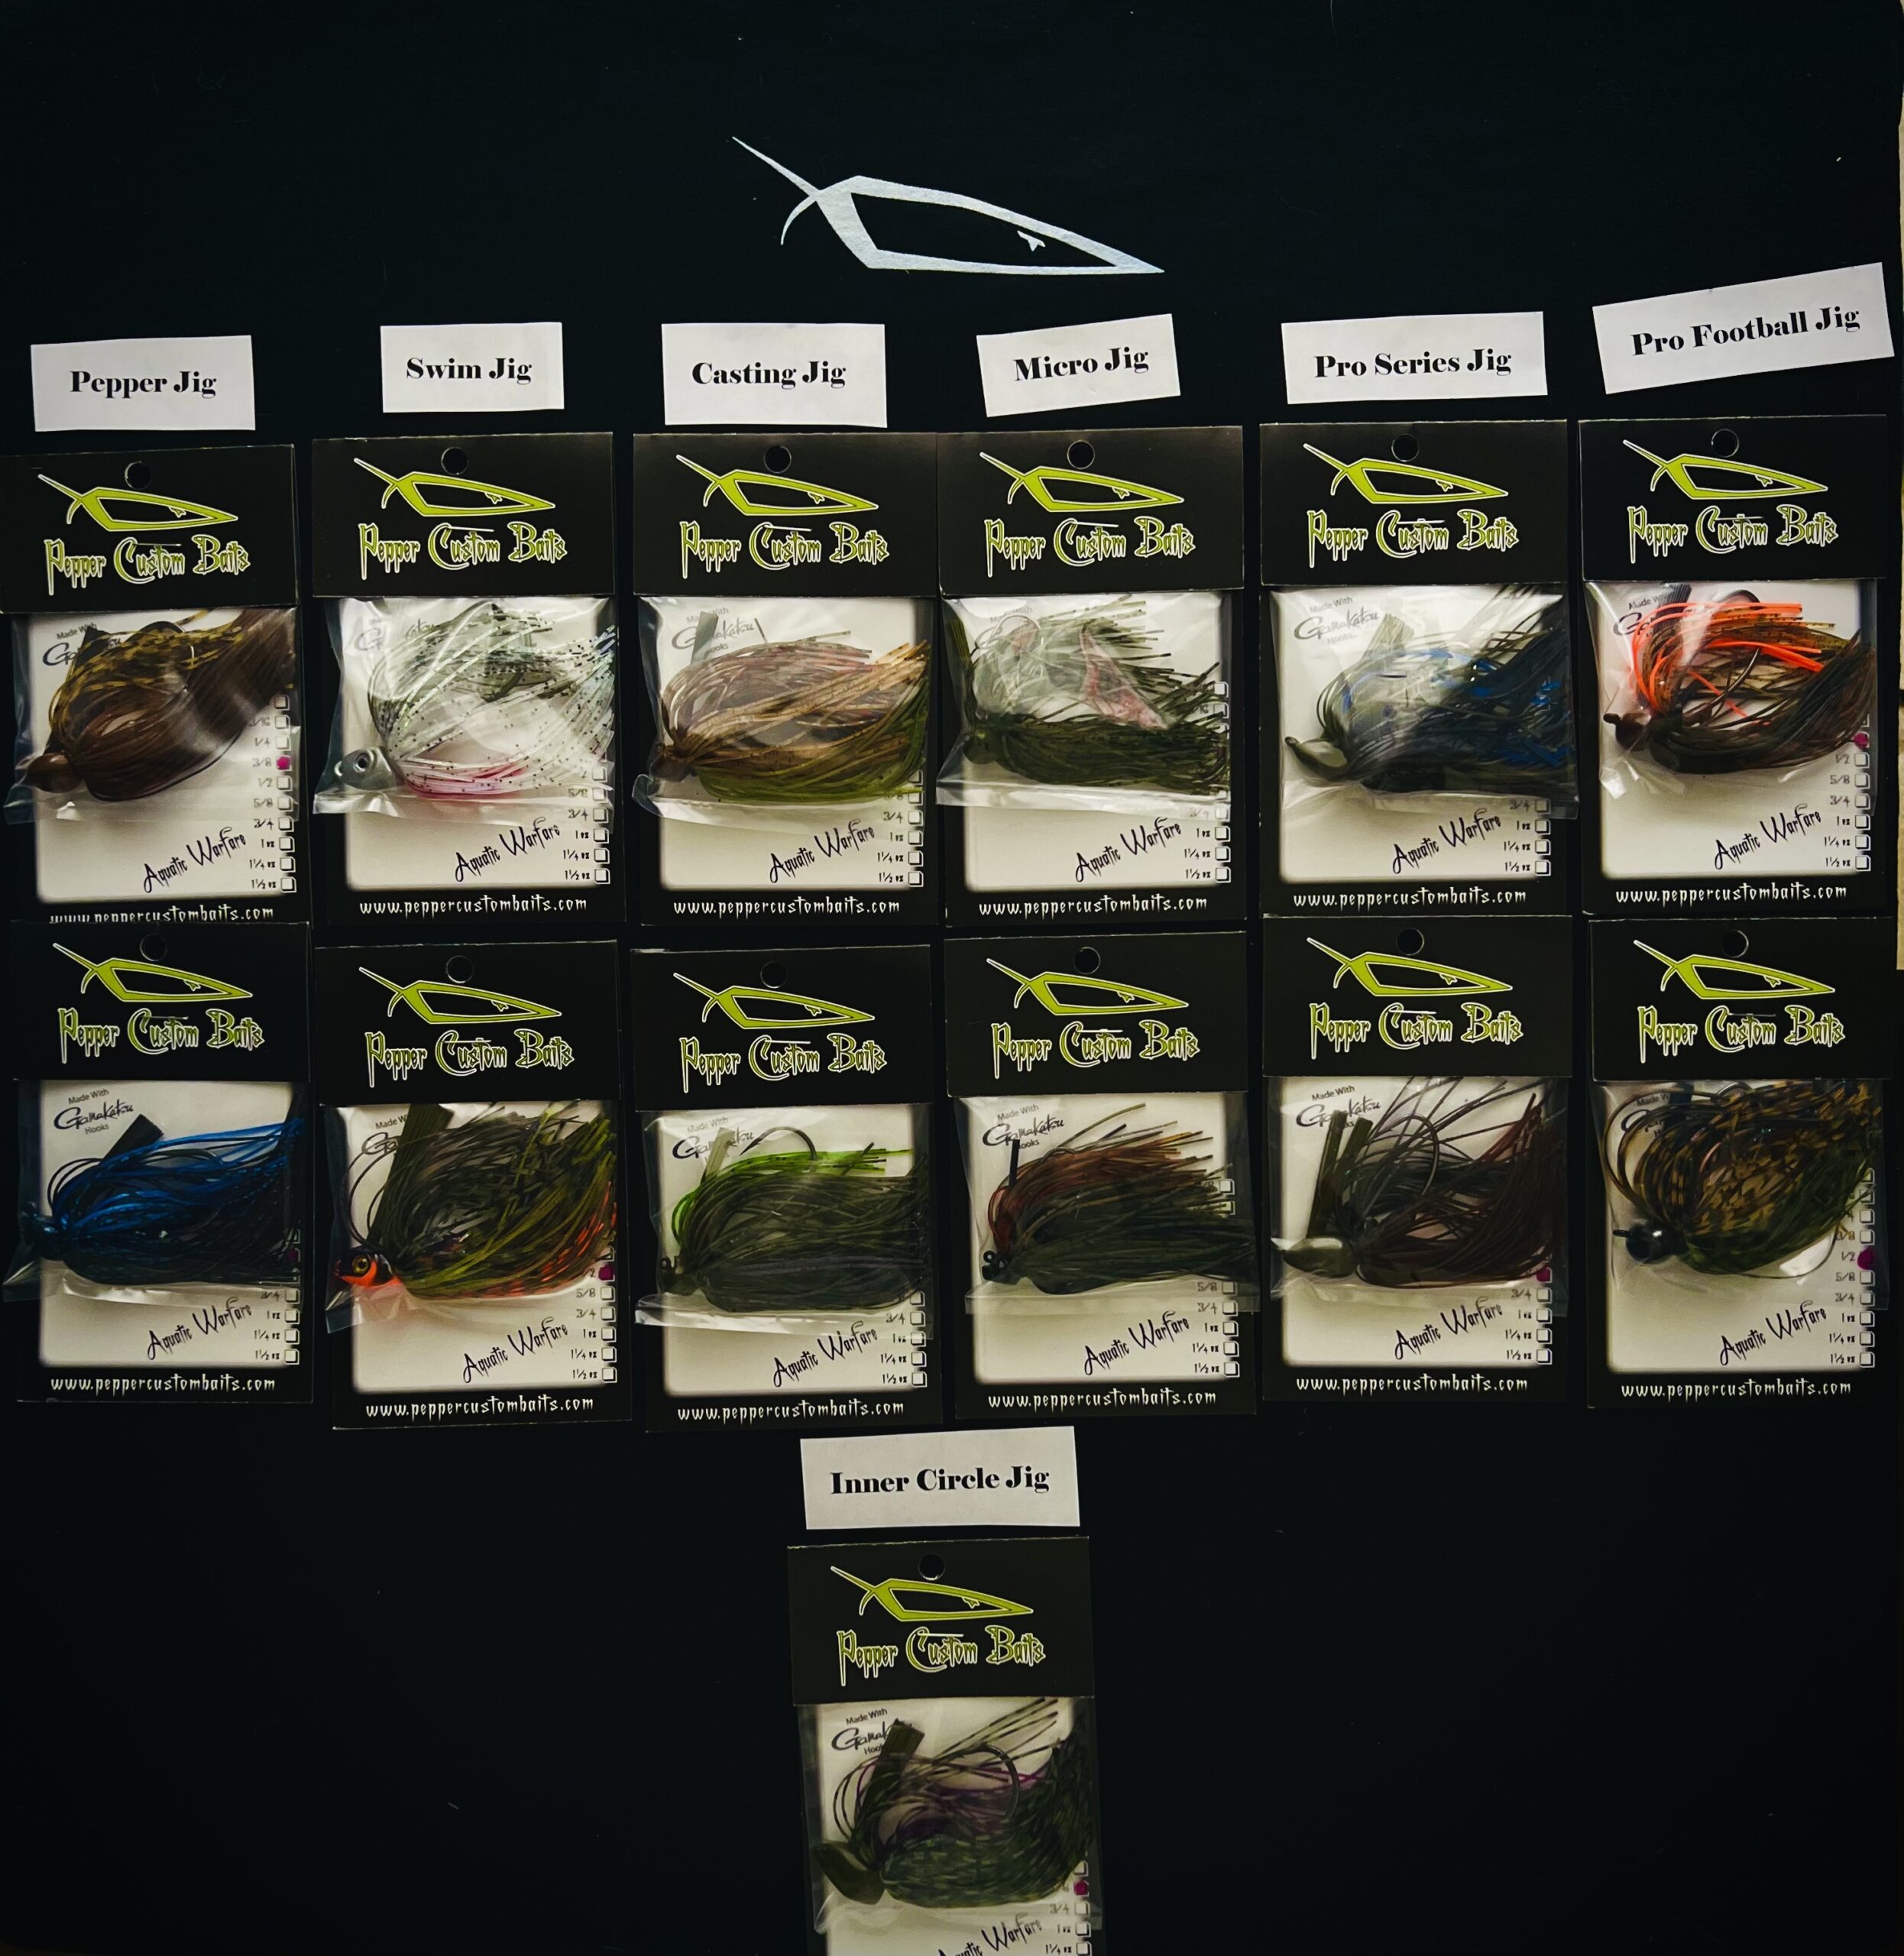 https://www.peppercustombaits.com/wp-content/uploads/2022/07/Jig-package-packaged-scaled.jpeg